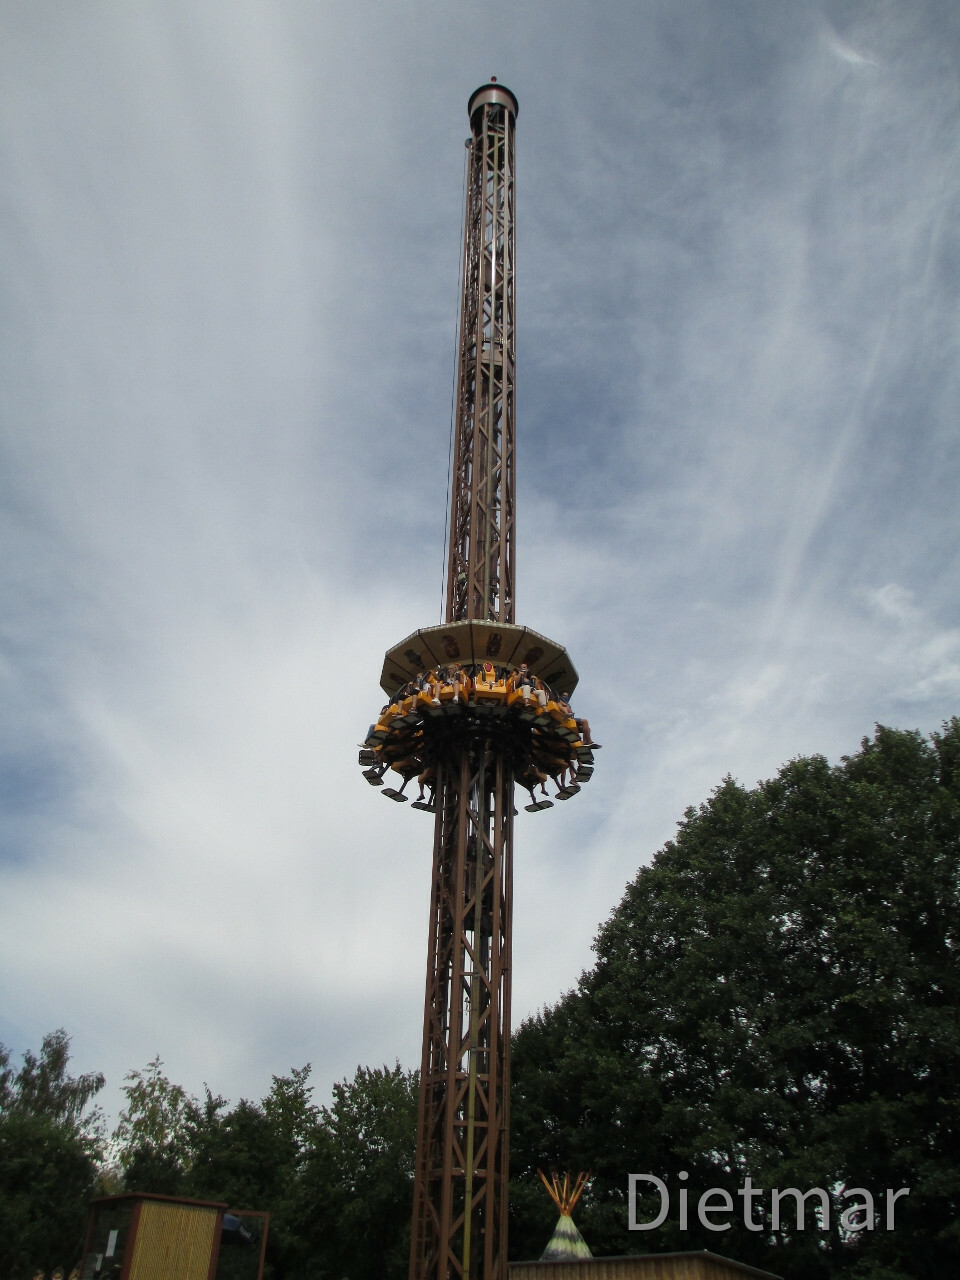 Freefall Tower